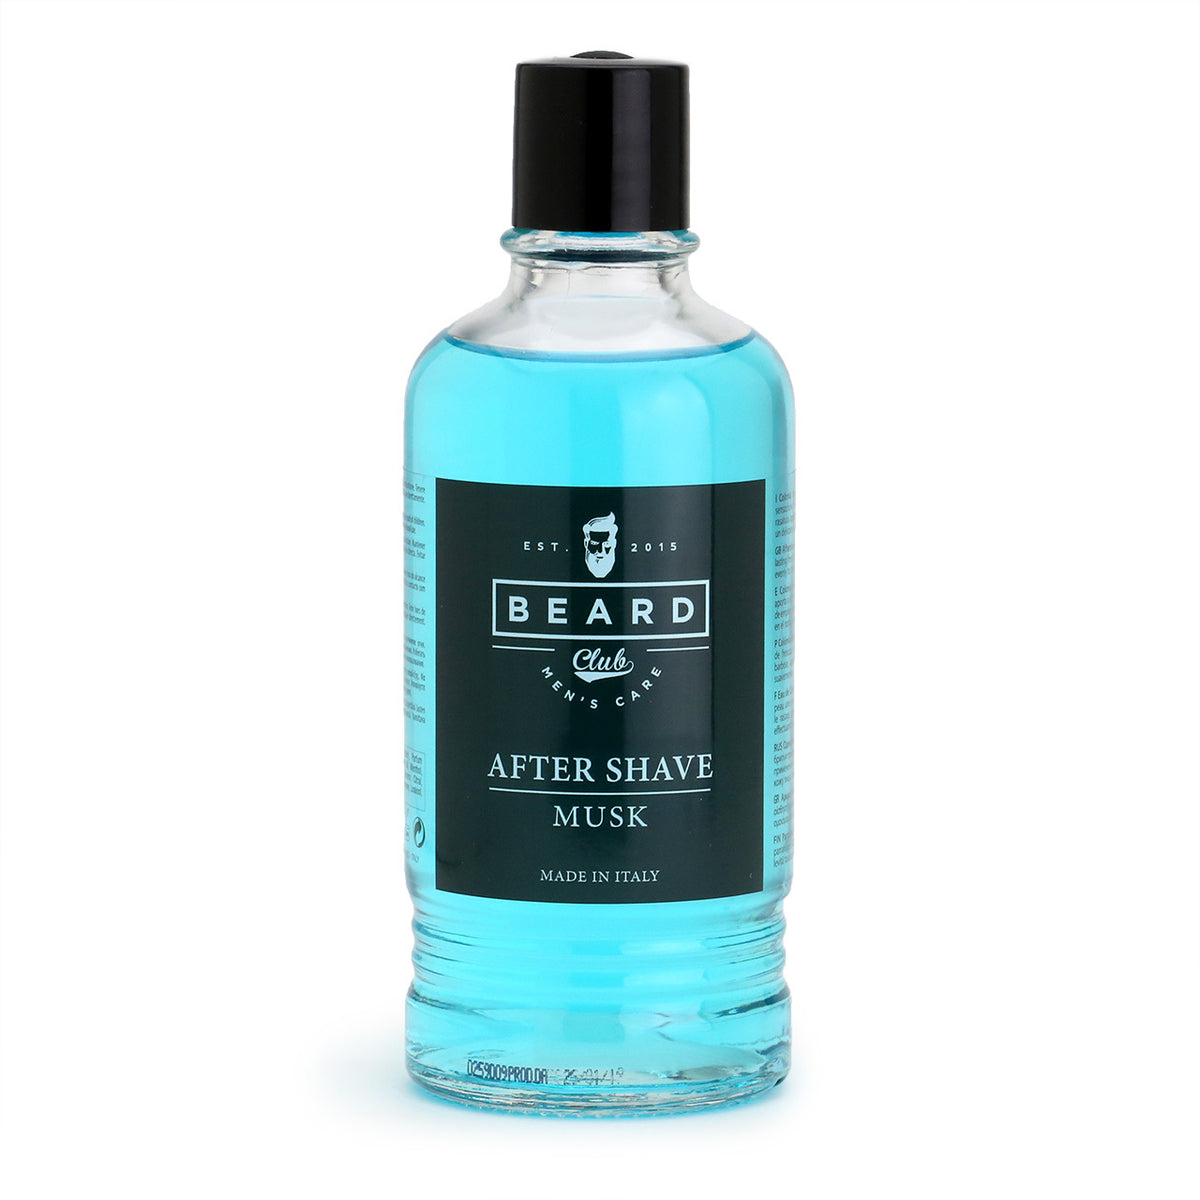 Beard Club After Shave Cologne 400ml - Musk